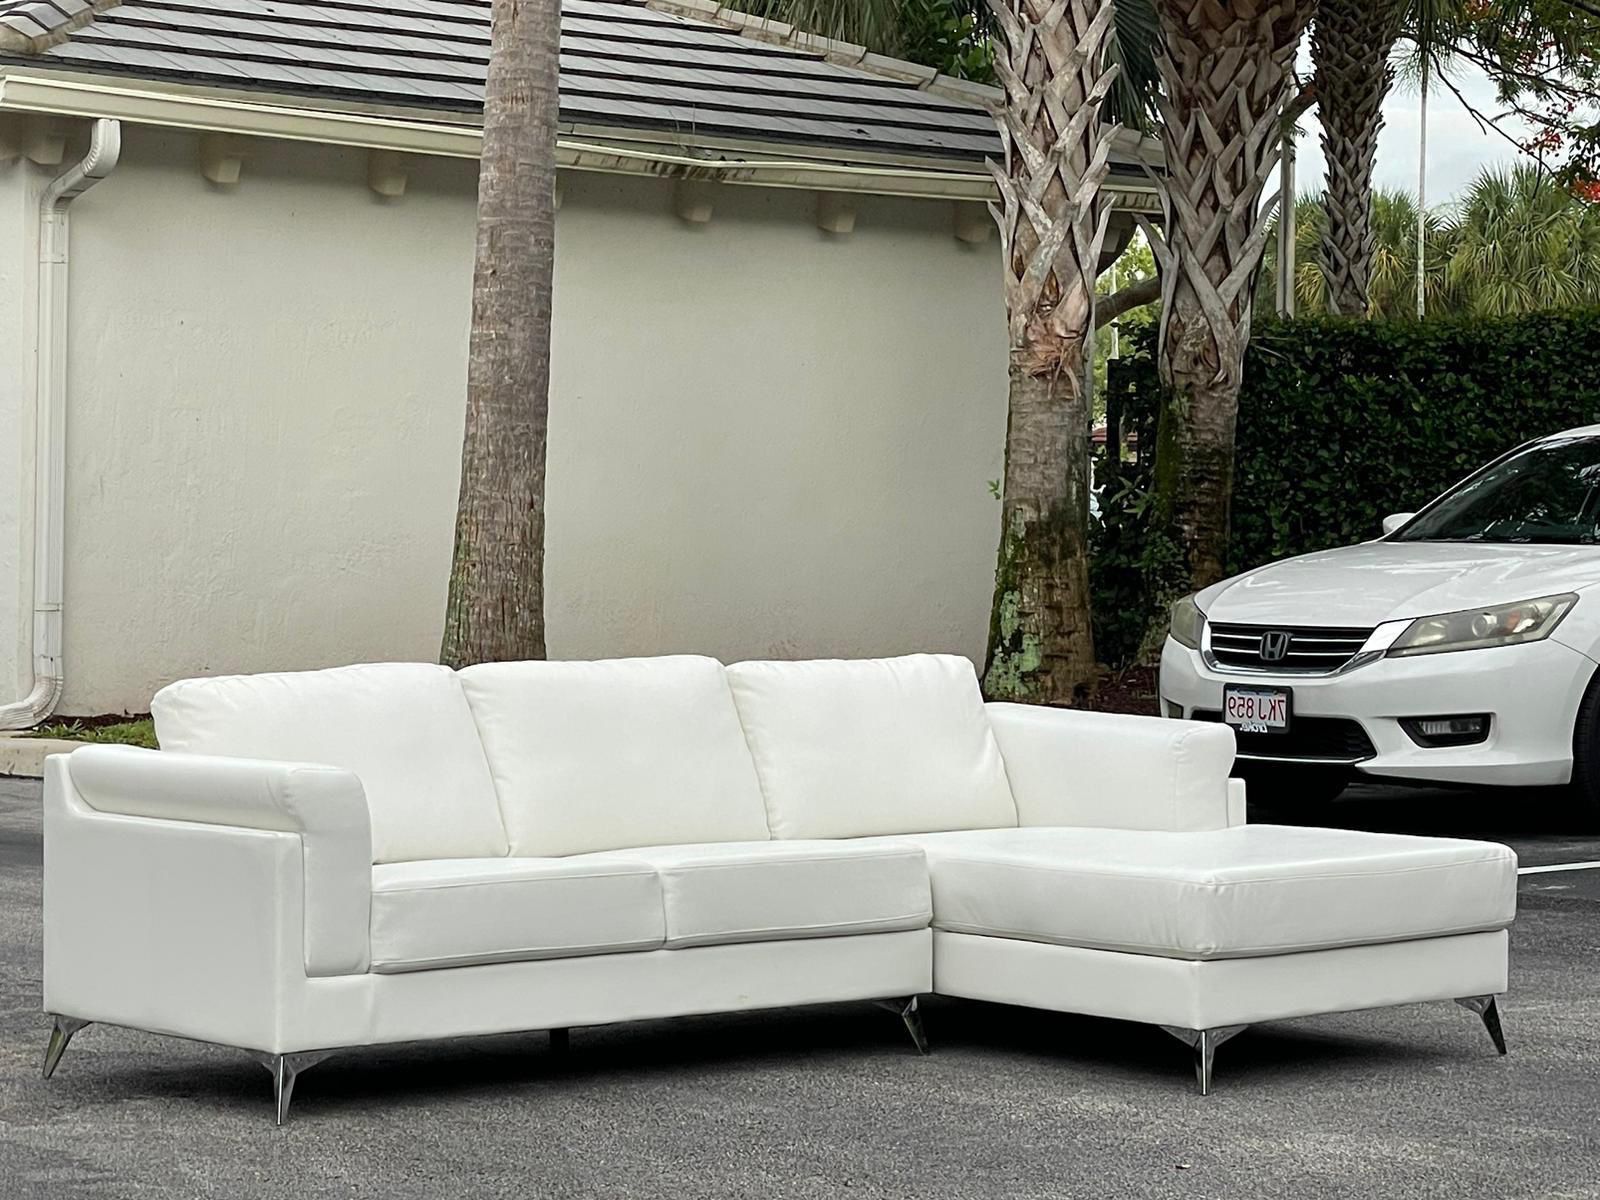 🛋️ Sofa/Couch Sectional - White - Like New - Faux Leather - Delivery Available 🚛